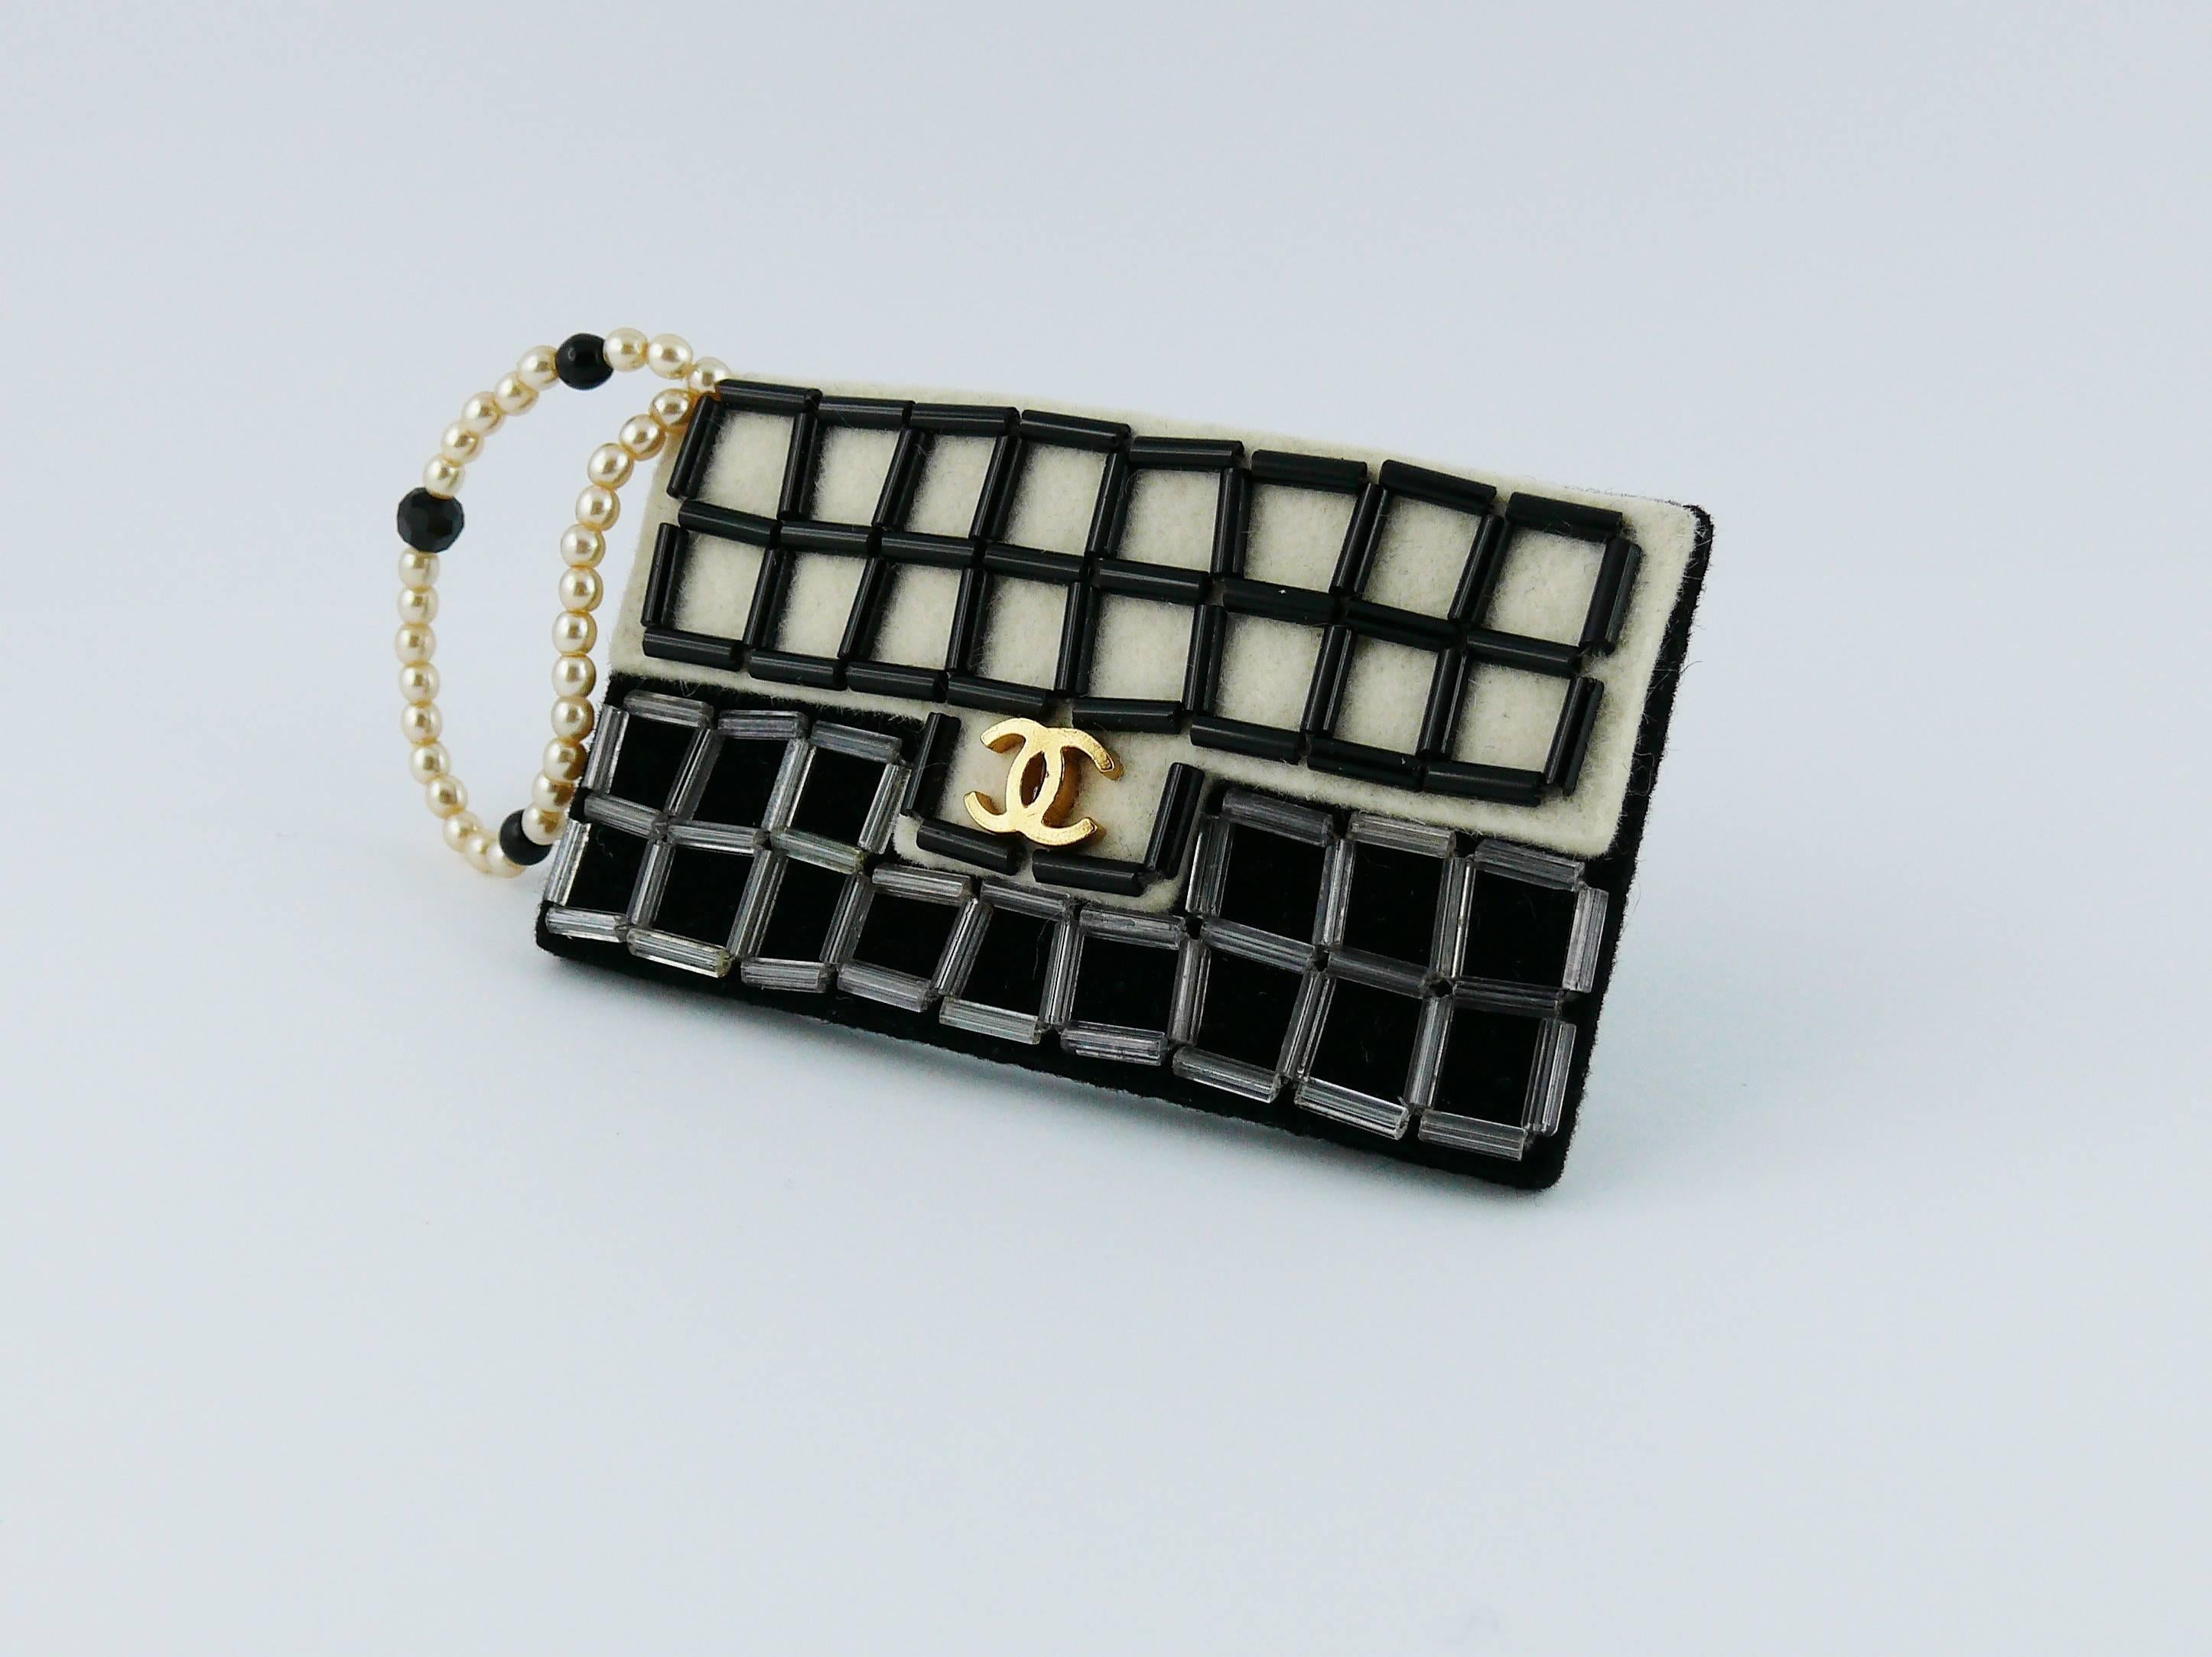 Women's Chanel Large Iconic 2.55 Bag Felt Brooch With Faux Pearl Strap